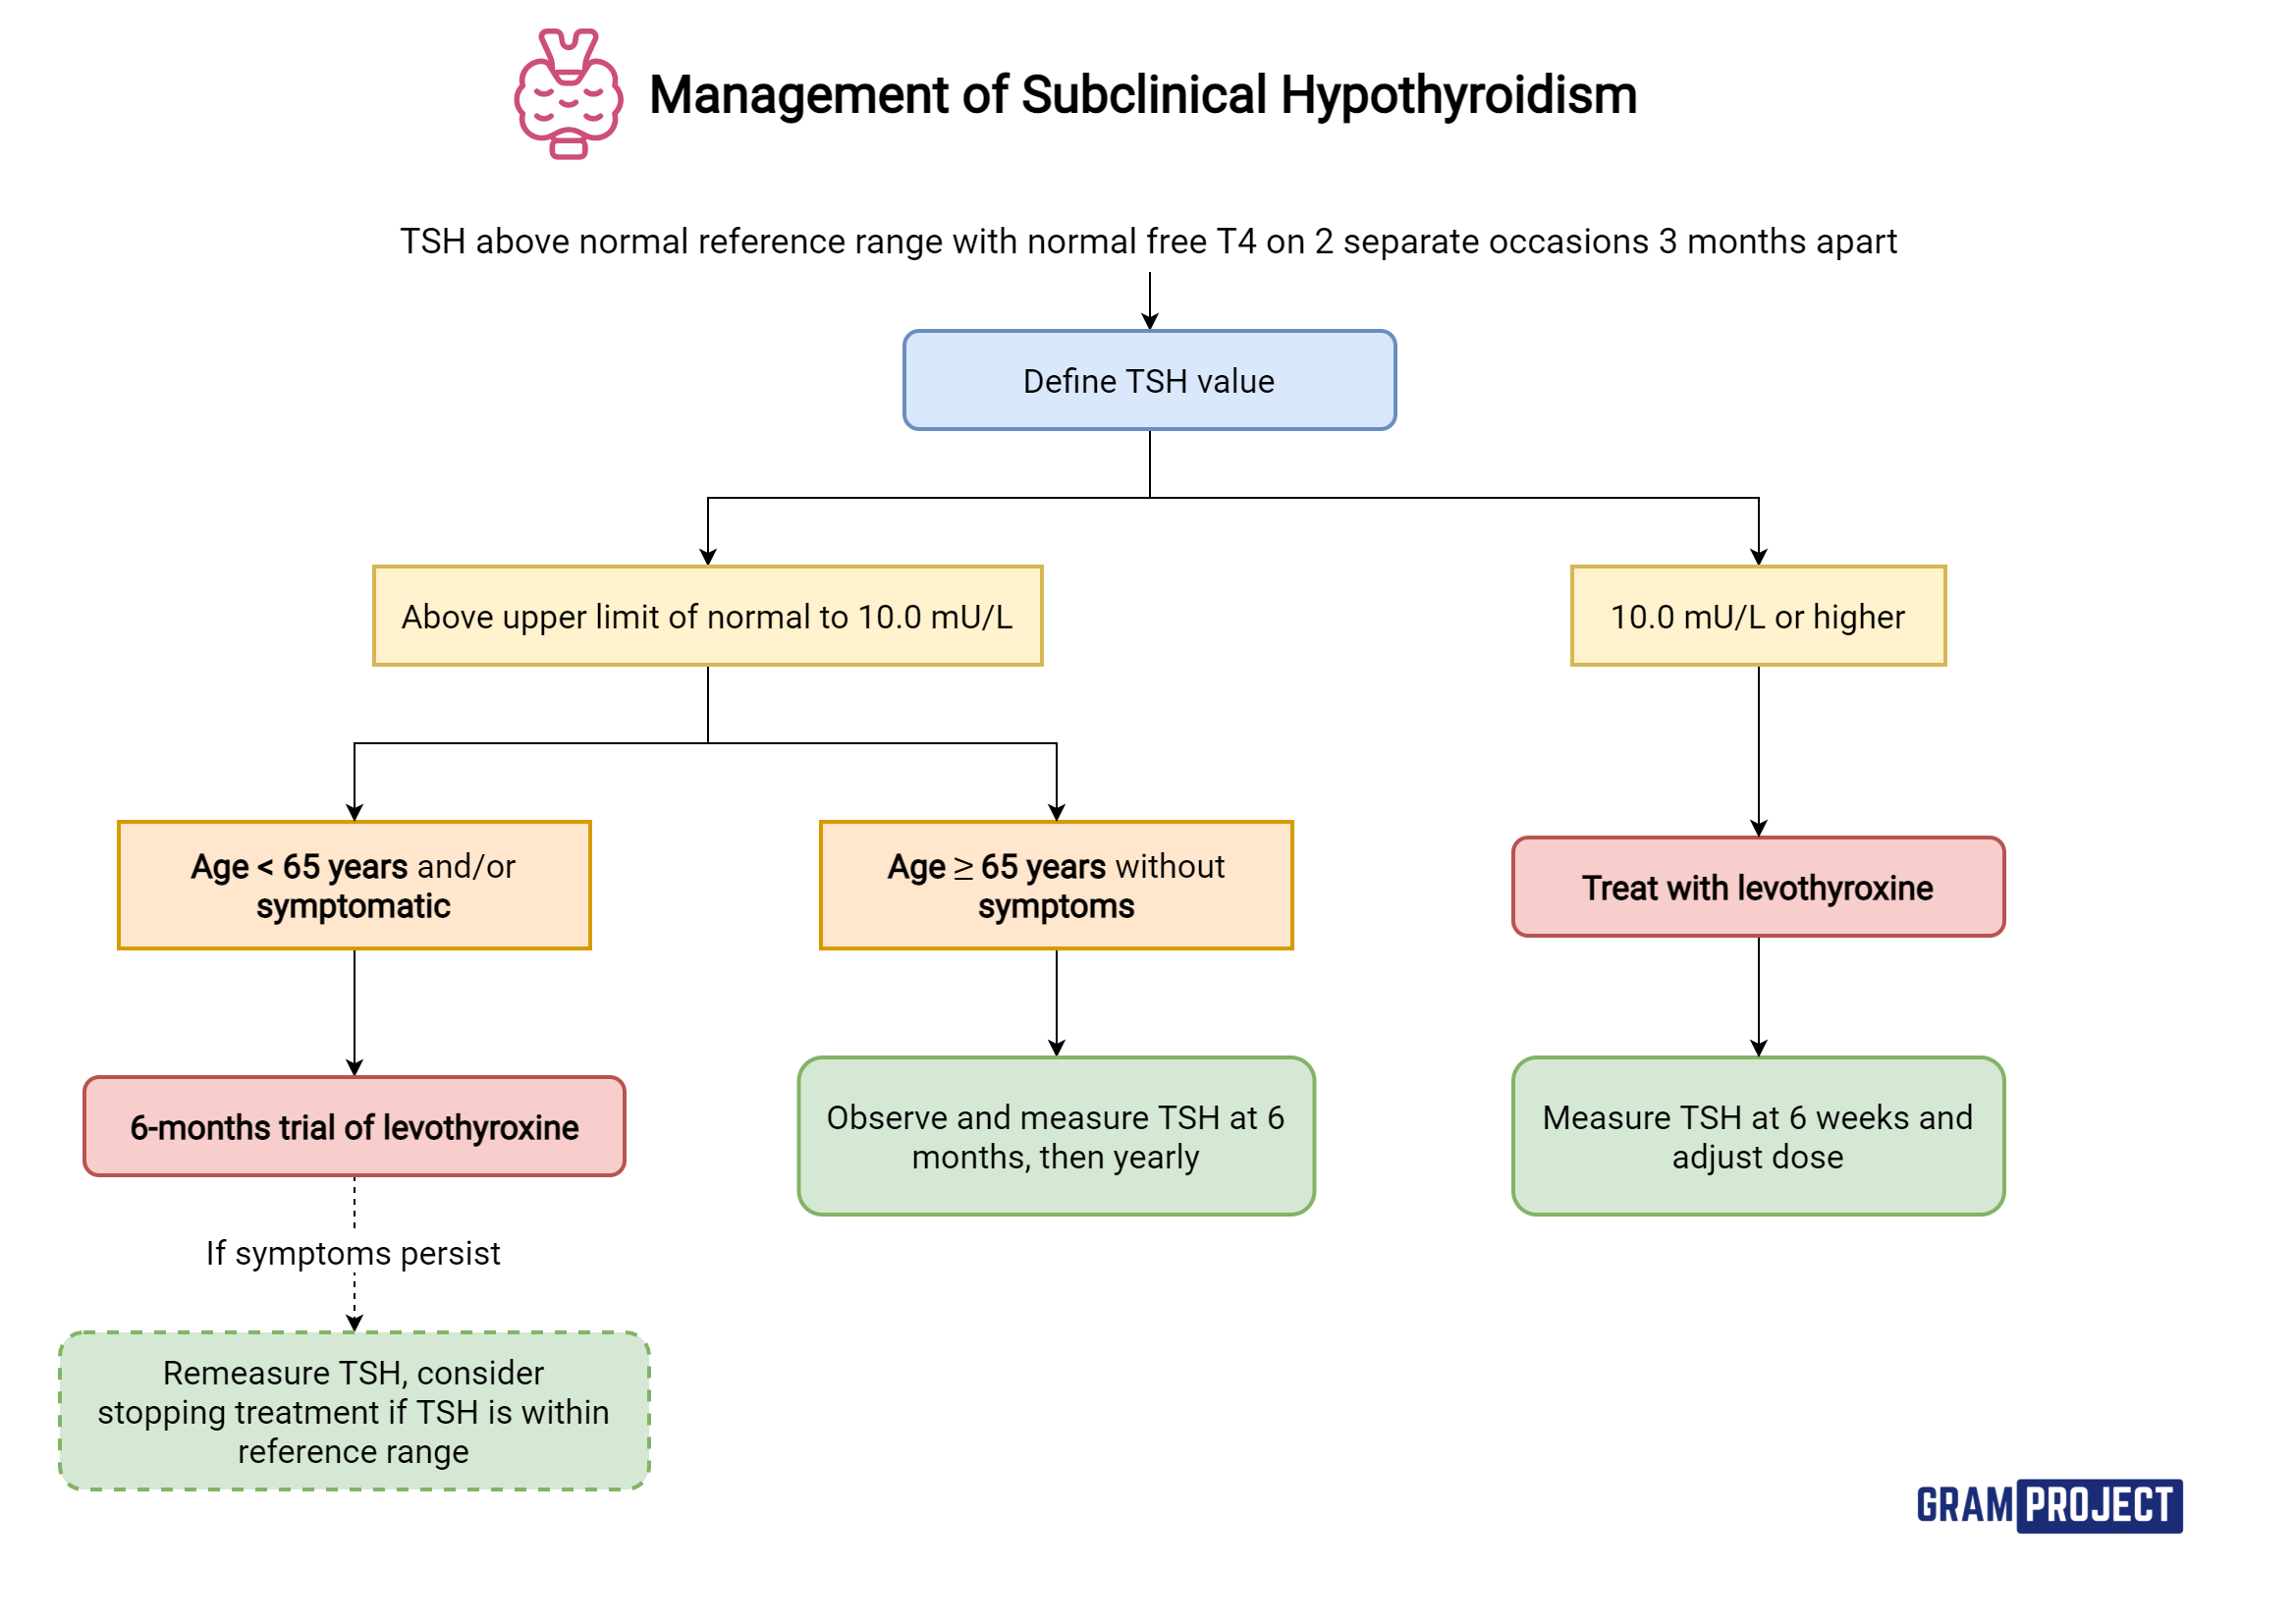 Flowchart guide to management of subclinical hypothyroidism based on NICE guidelines